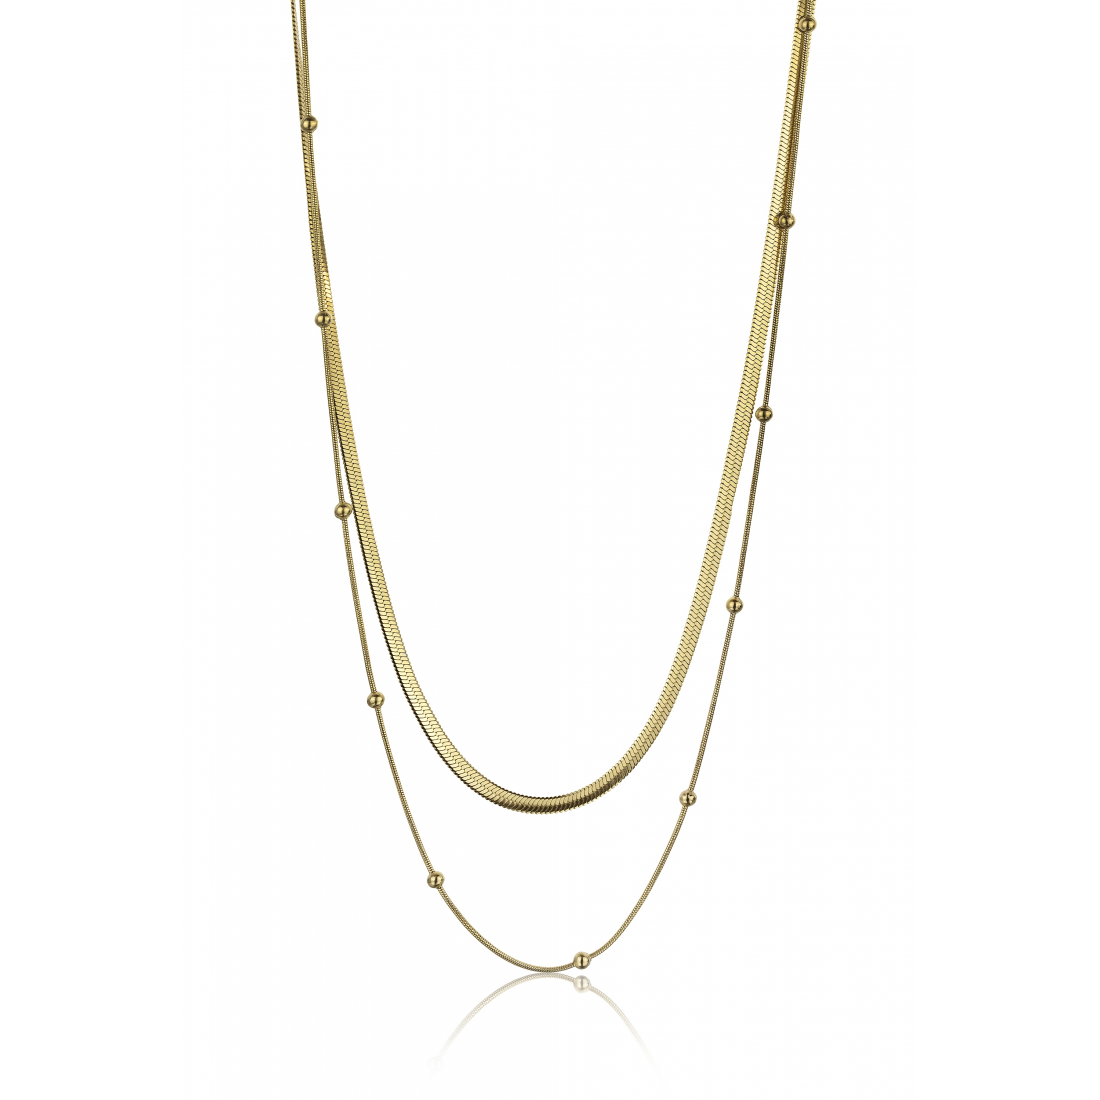 Women's 'Adelyn' Necklace